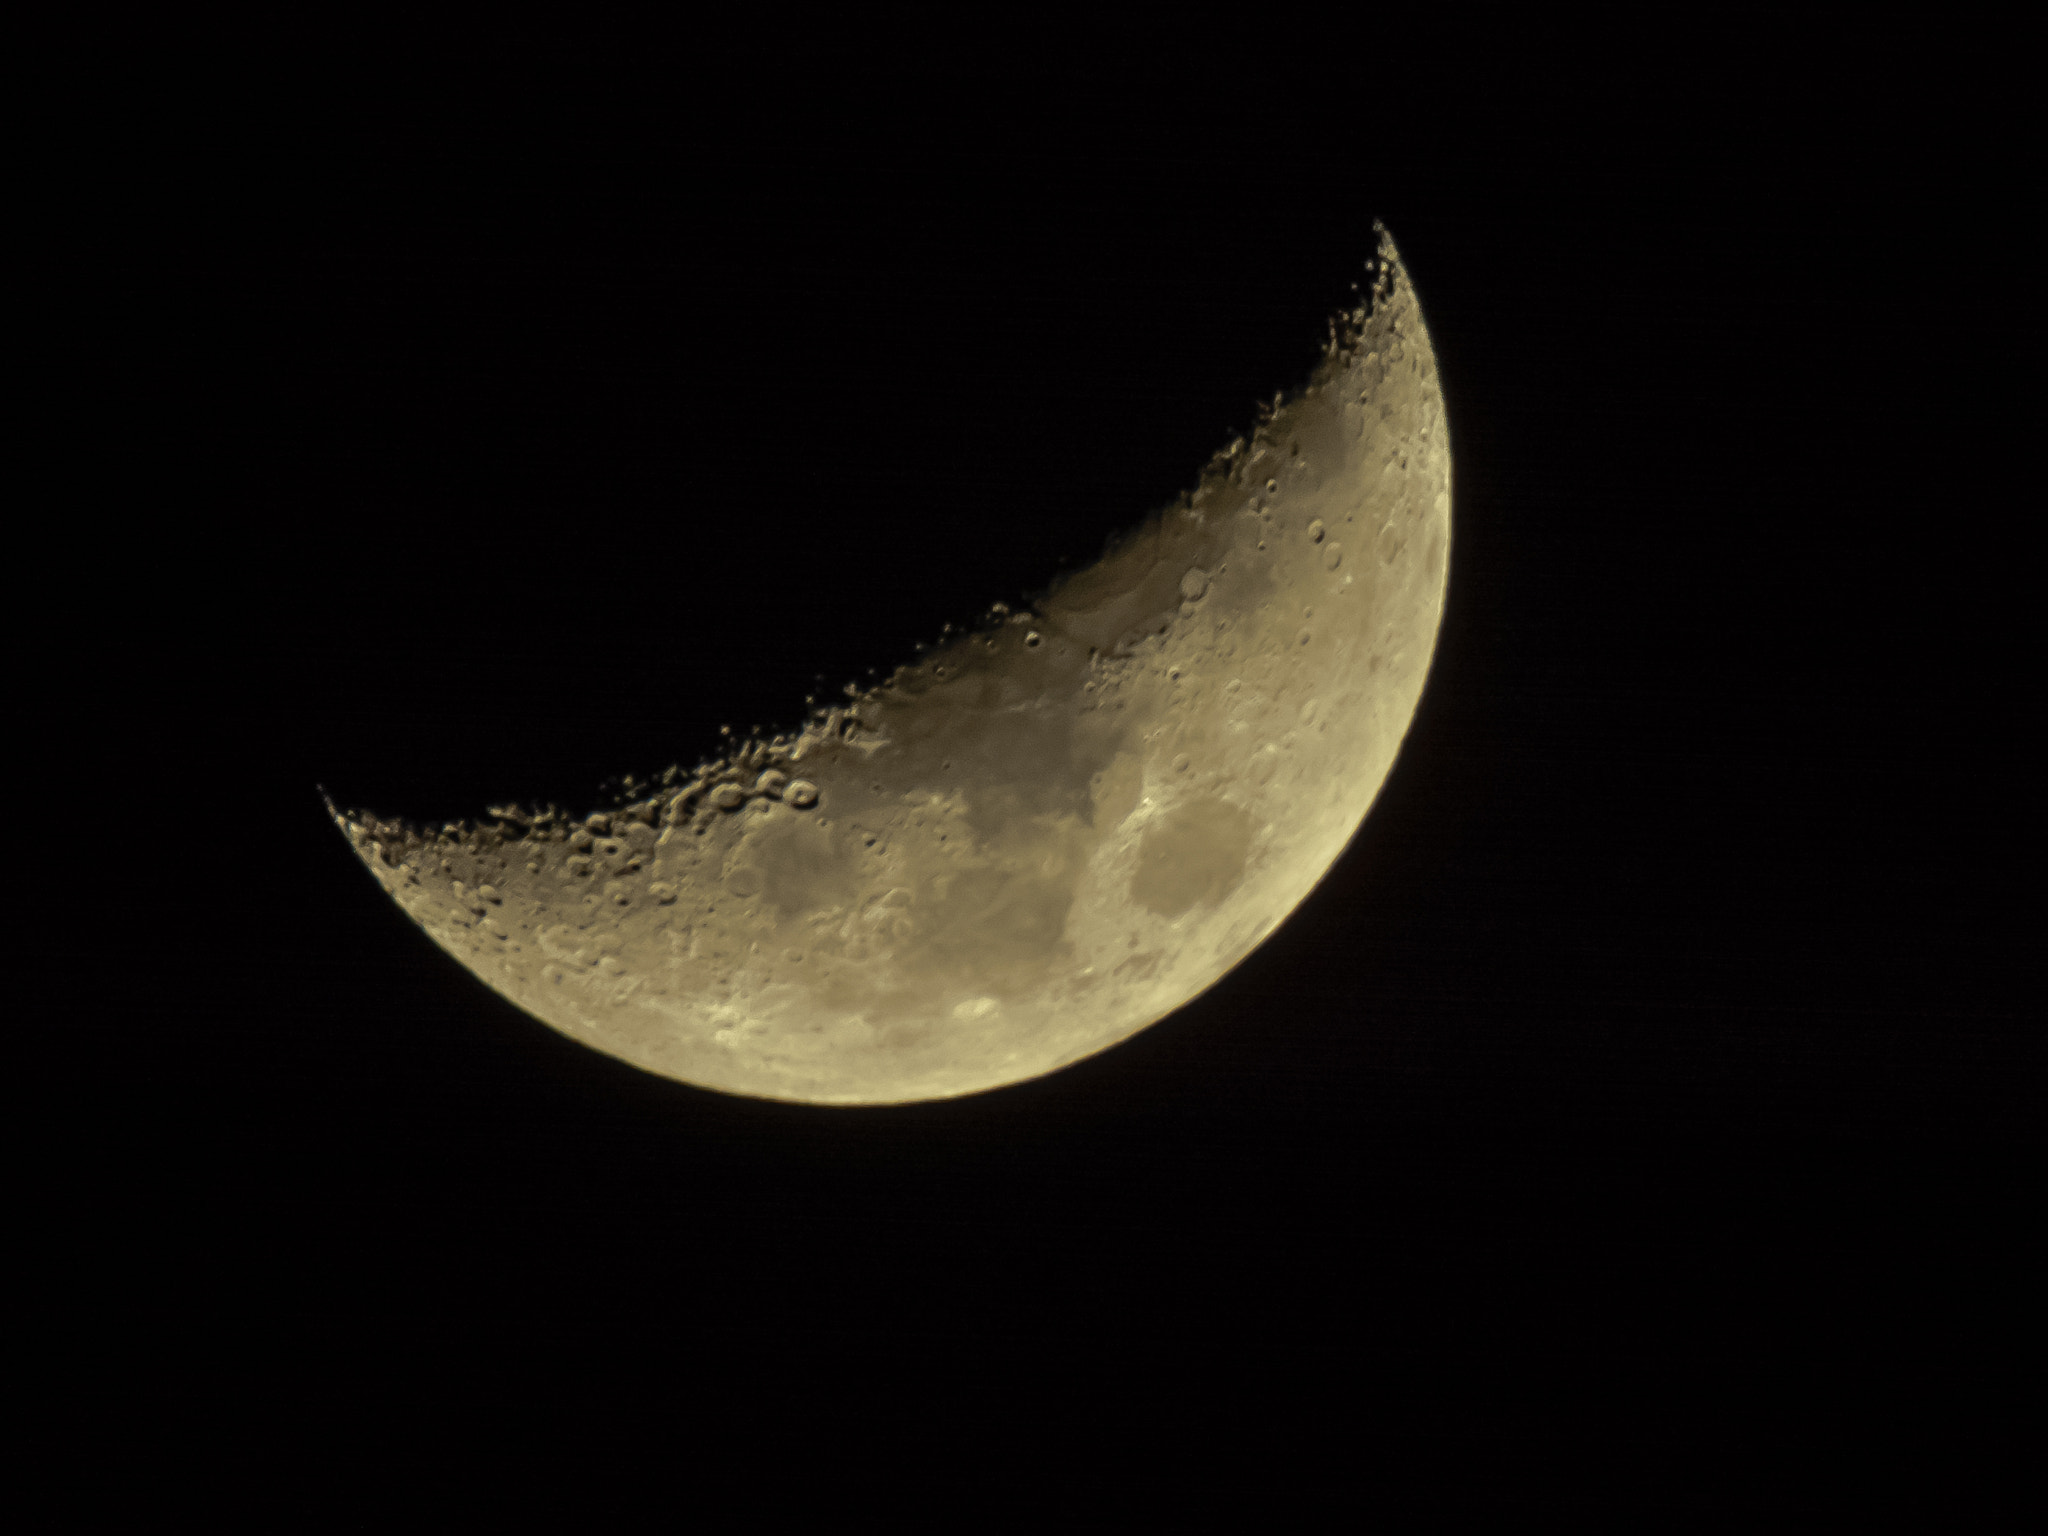 Nikon D7100 + Sigma 150-600mm F5-6.3 DG OS HSM | C sample photo. Moon of 2nd april 2017 from japan photography